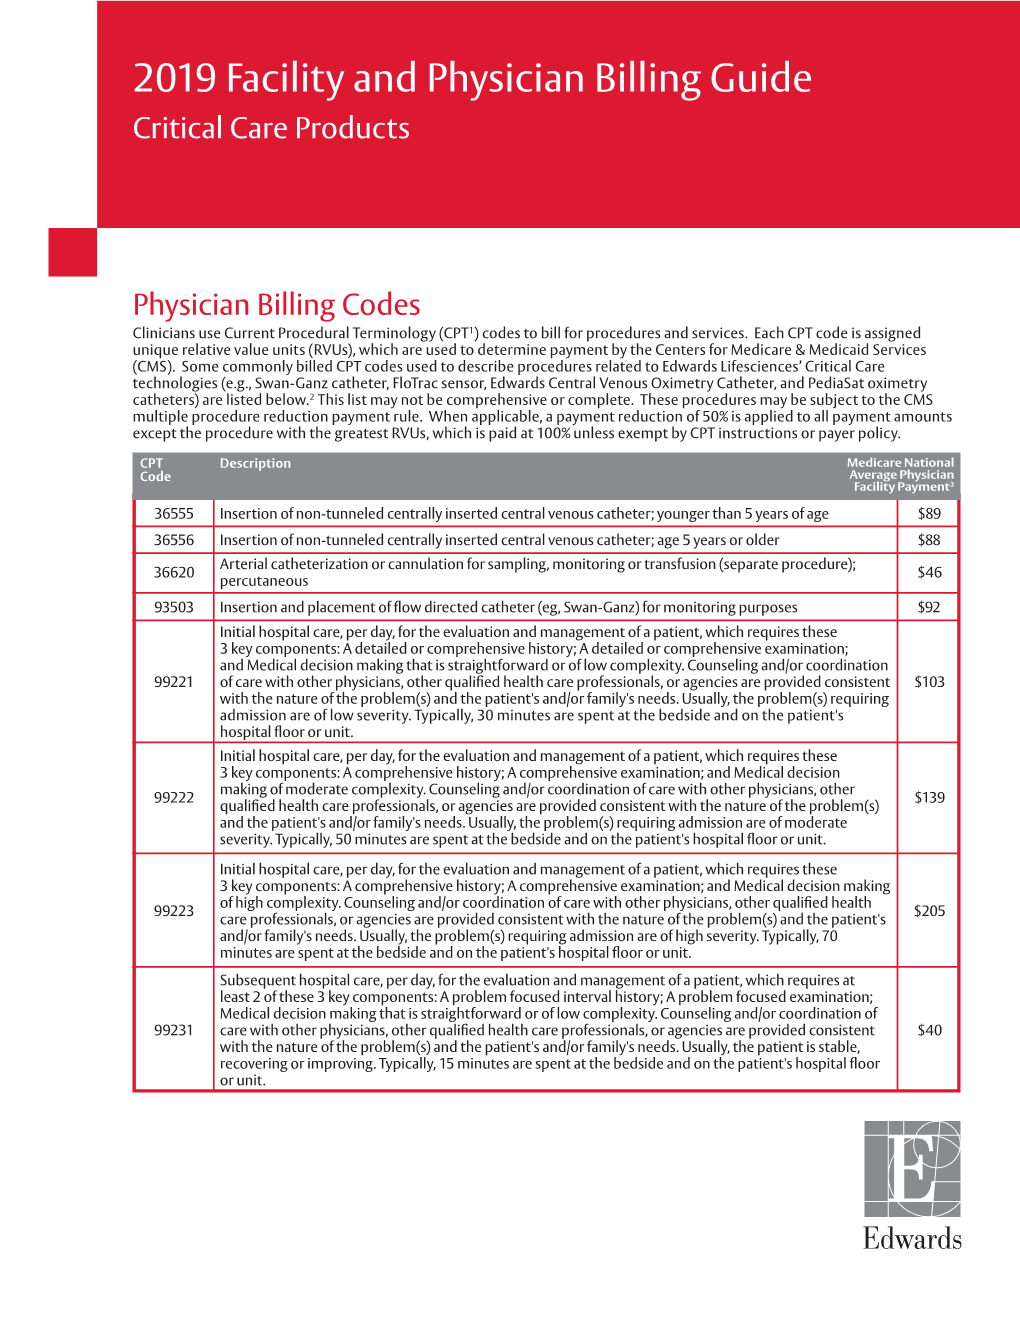 2019 Facility and Physician Billing Guide Critical Care Products